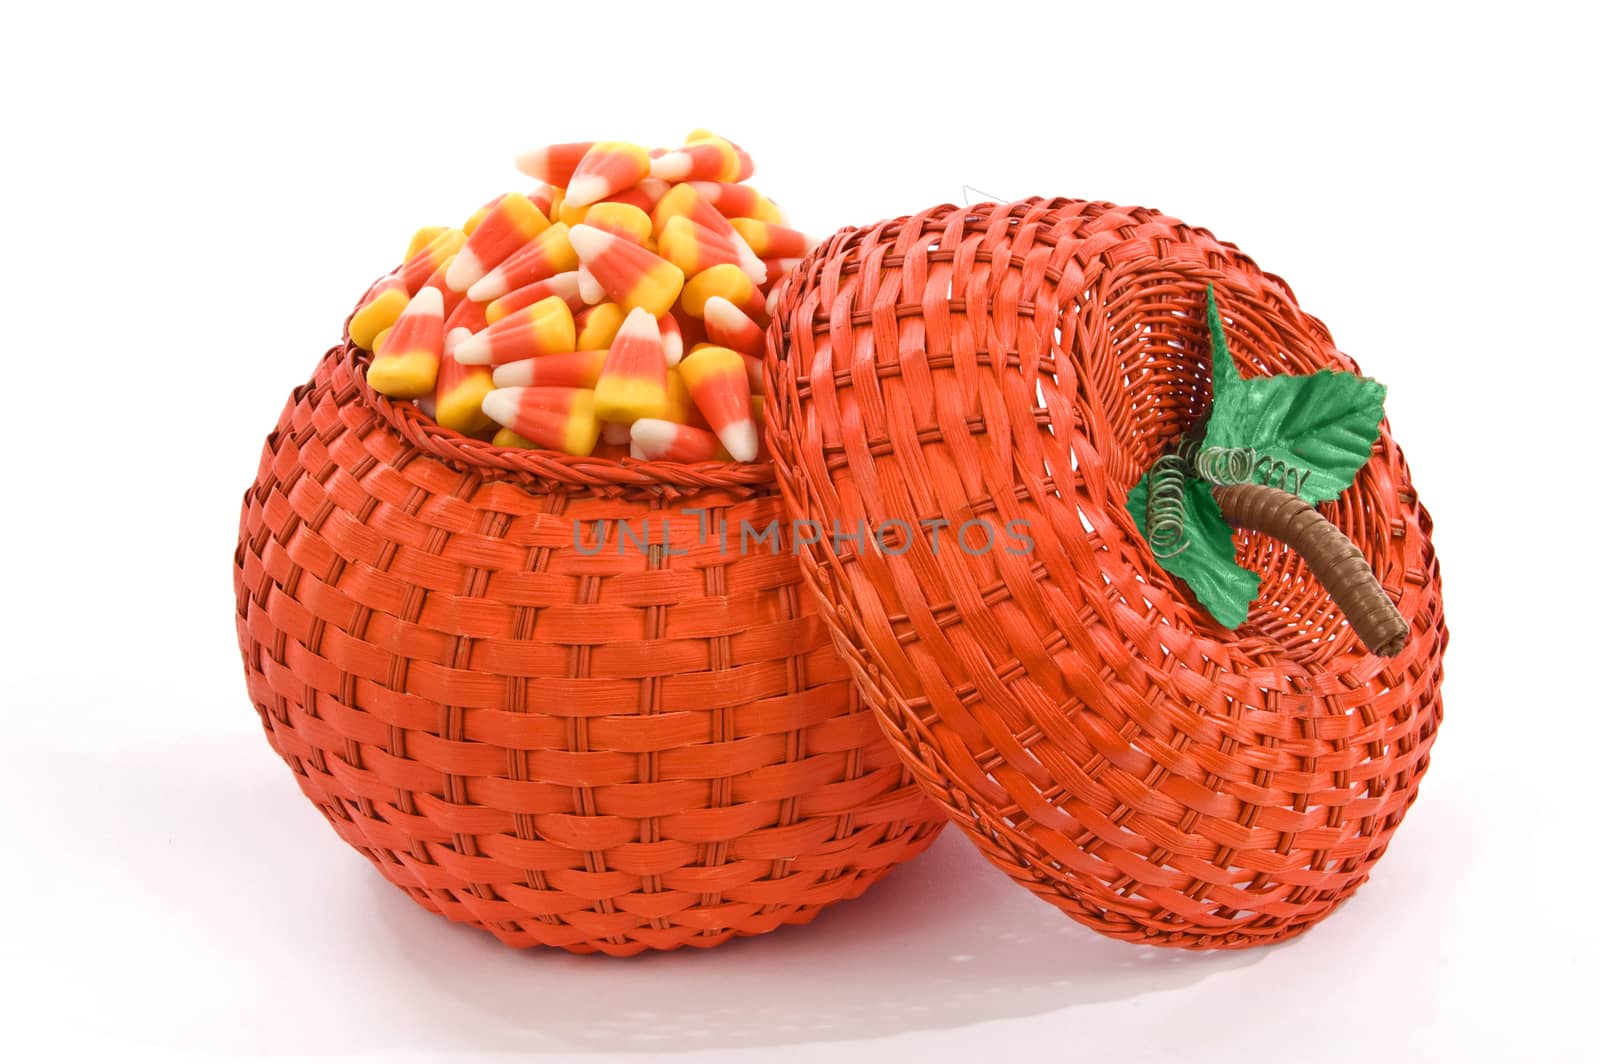 Candy Corn In Autumn Pumpkin Basket by stockbuster1